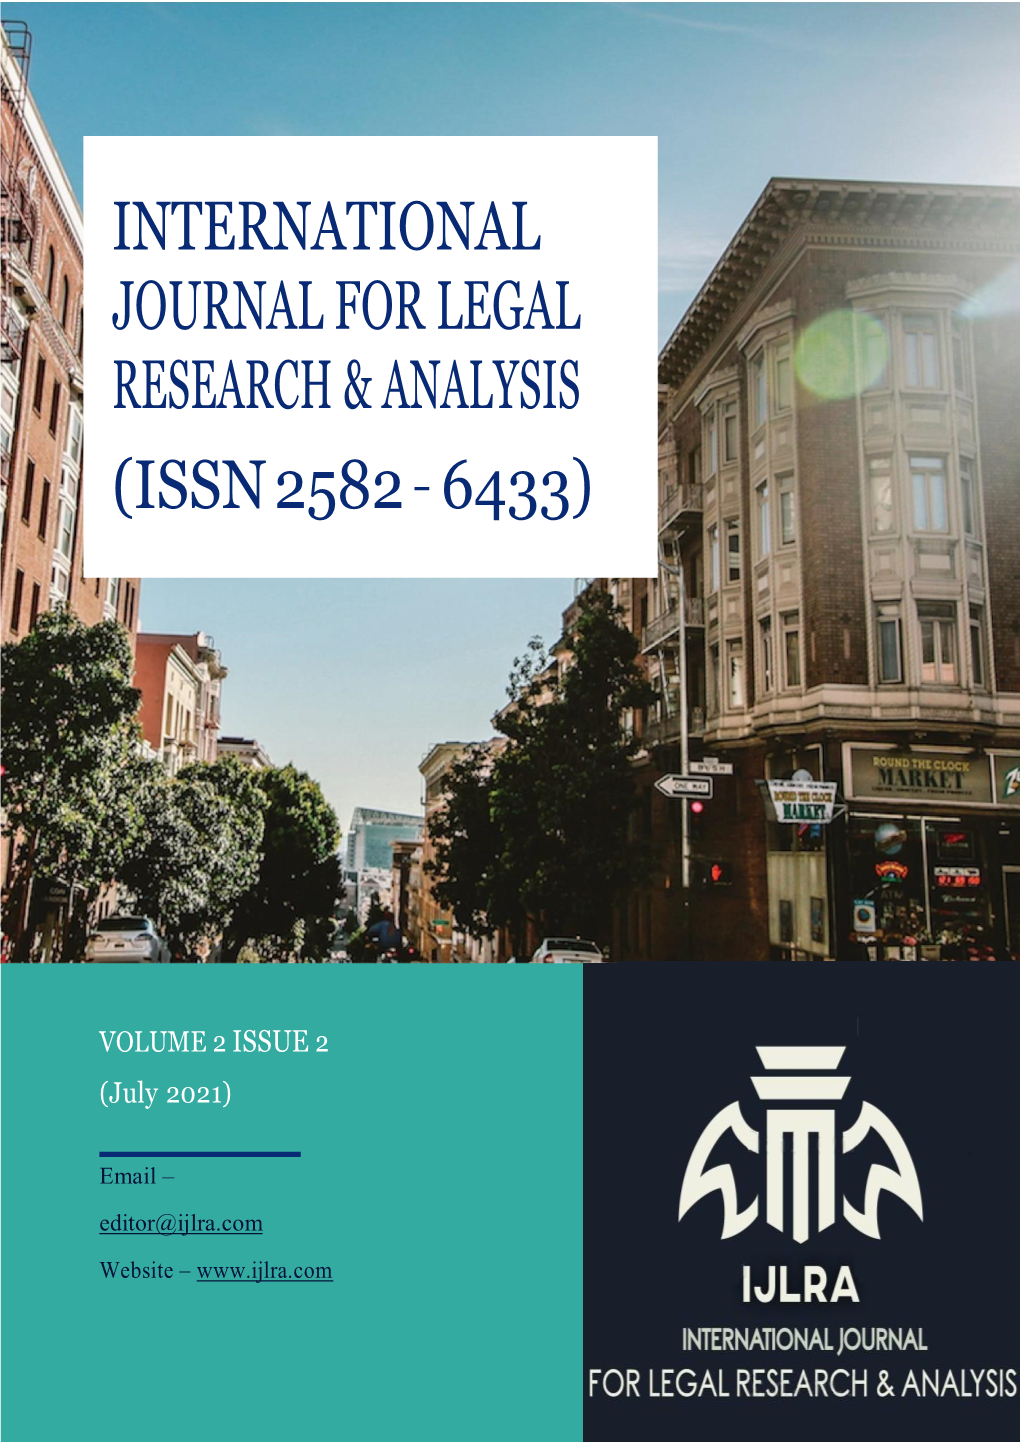 International Journal for Legal Research & Analysis (Issn 2582 – 6433)